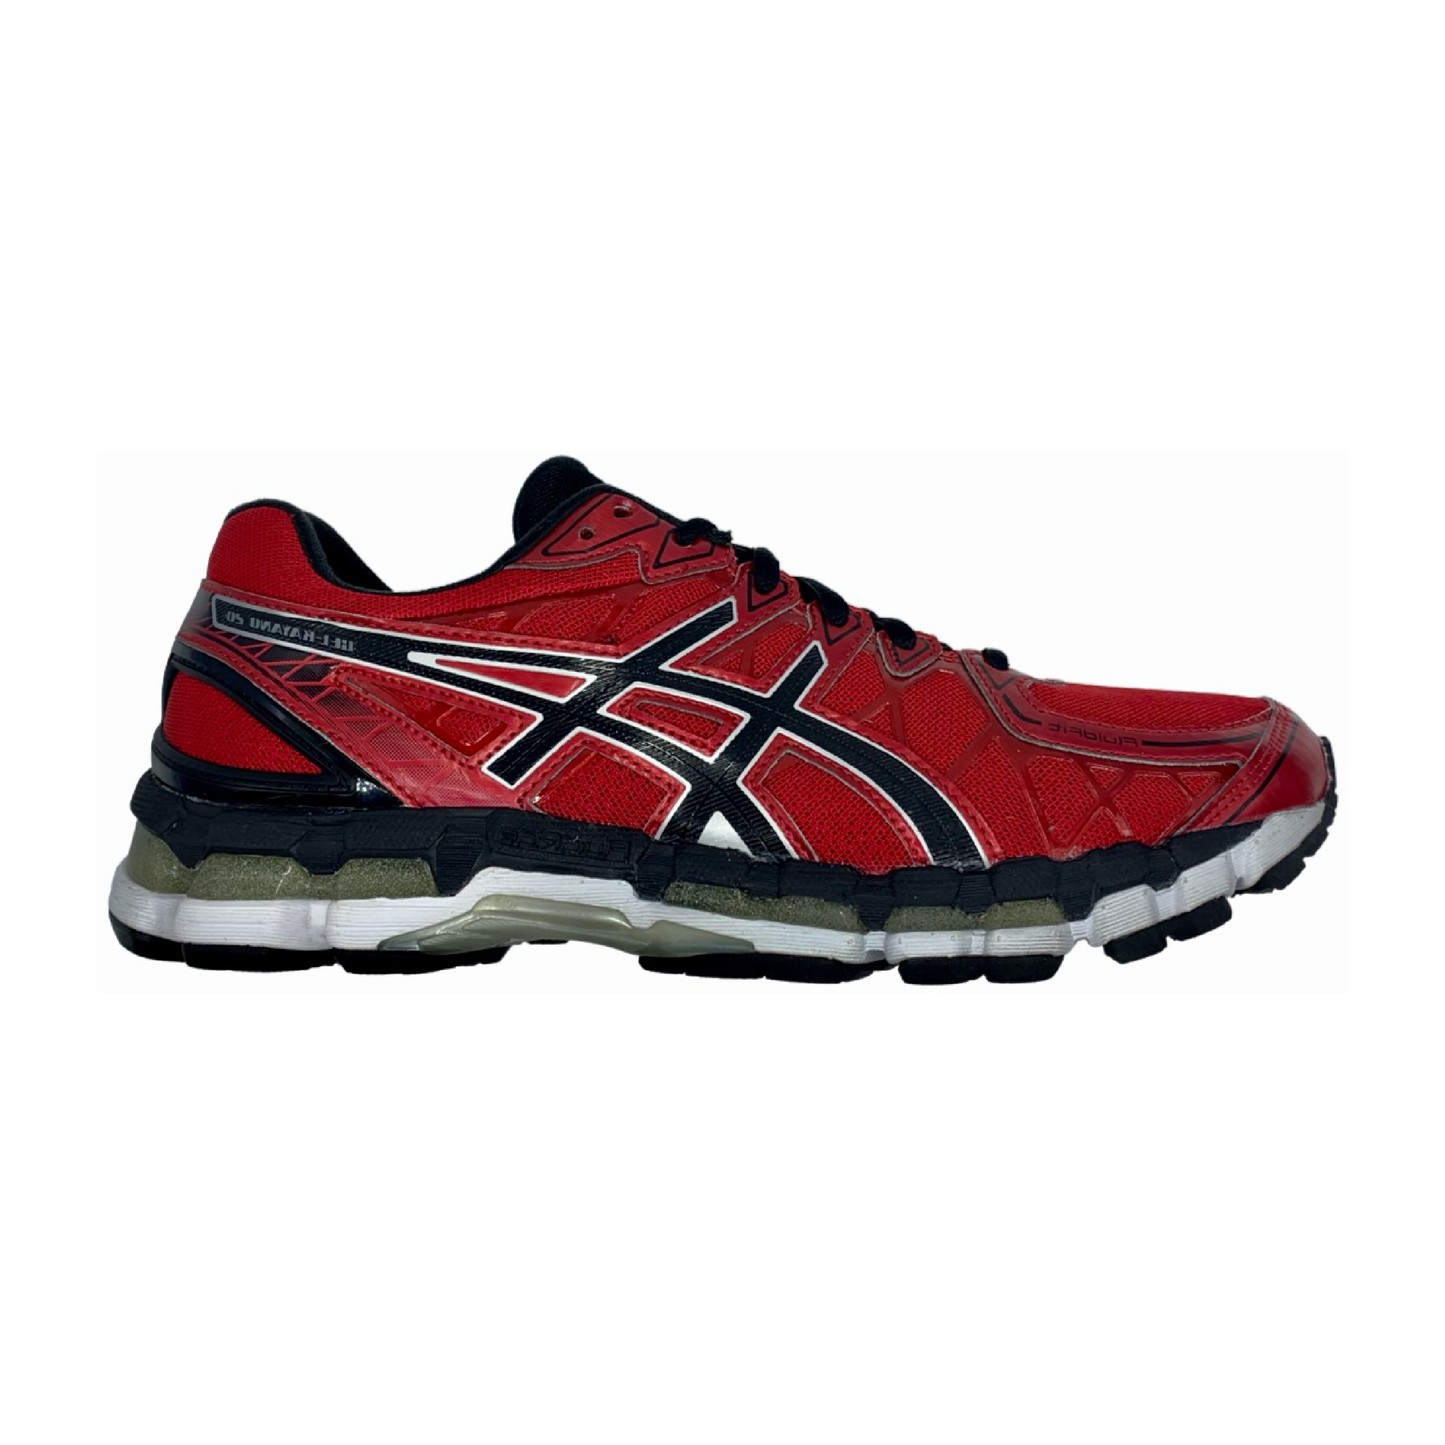 Gel-Kayano 20 'Rosso Red' –